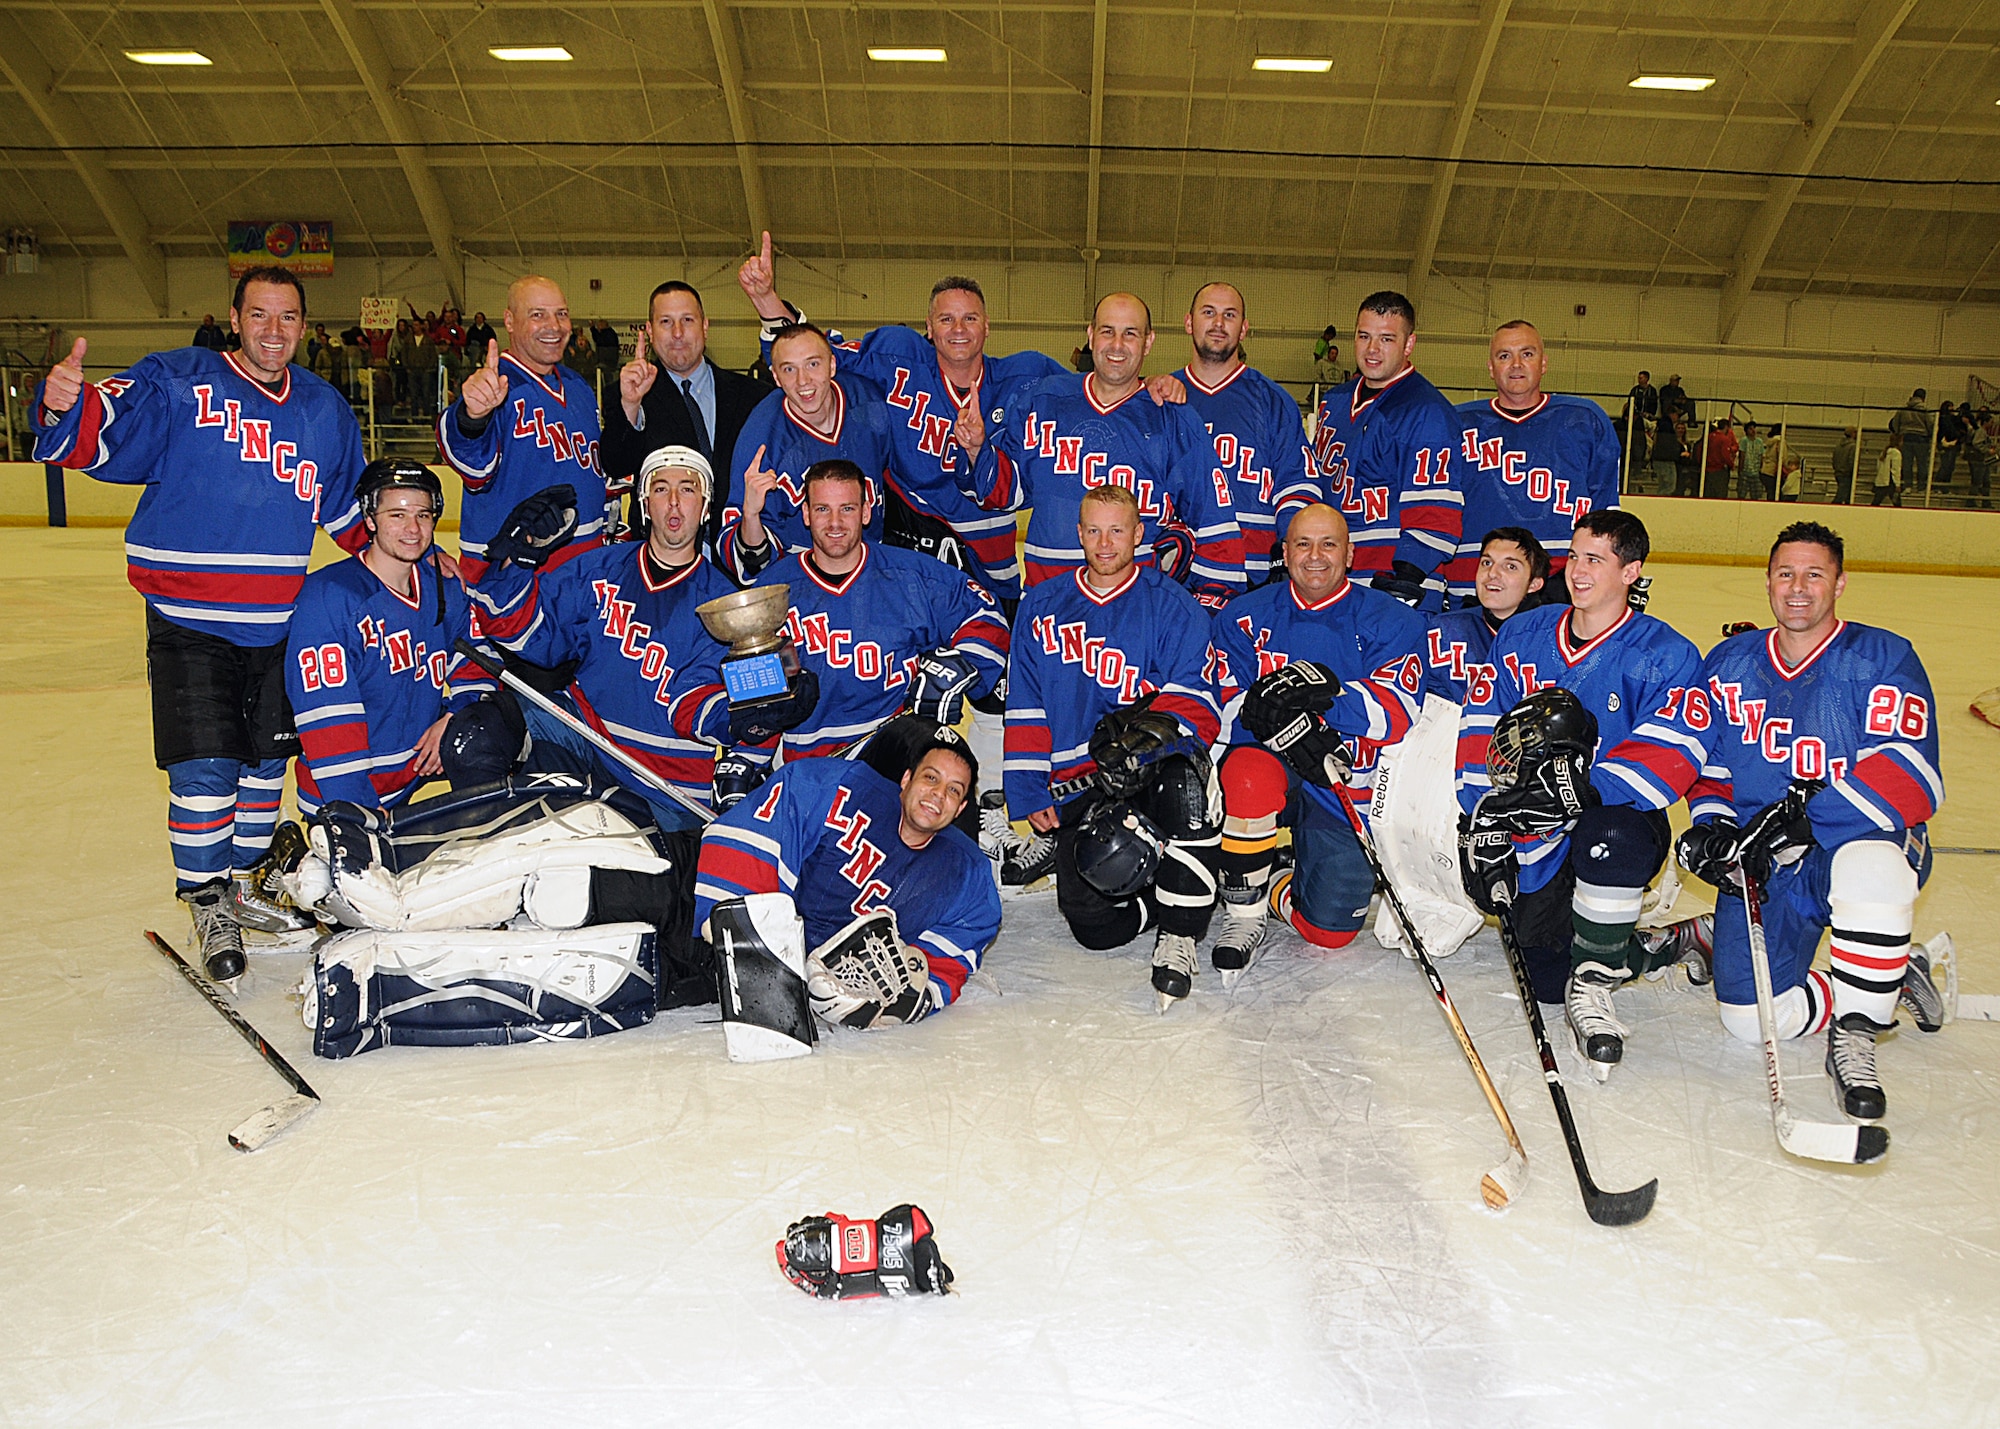 Members of the RI Air National Guard hockey team pose for a team photo after their victory at the General's Cup Hockey Tournament. The tournament is played each year between the Rhode Island Army and Air National Guard as a charity event. The game was played this year to benefit United States Marine Corps Corporal Kevin Dubois, a native of Lincoln, RI who was wounded in battle, via Homes for Our Troops. The Air Guard took the cup in a 6-5 double shoot out win. National Guard Photo by Master Sgt. Janeen Miller (RELEASED)